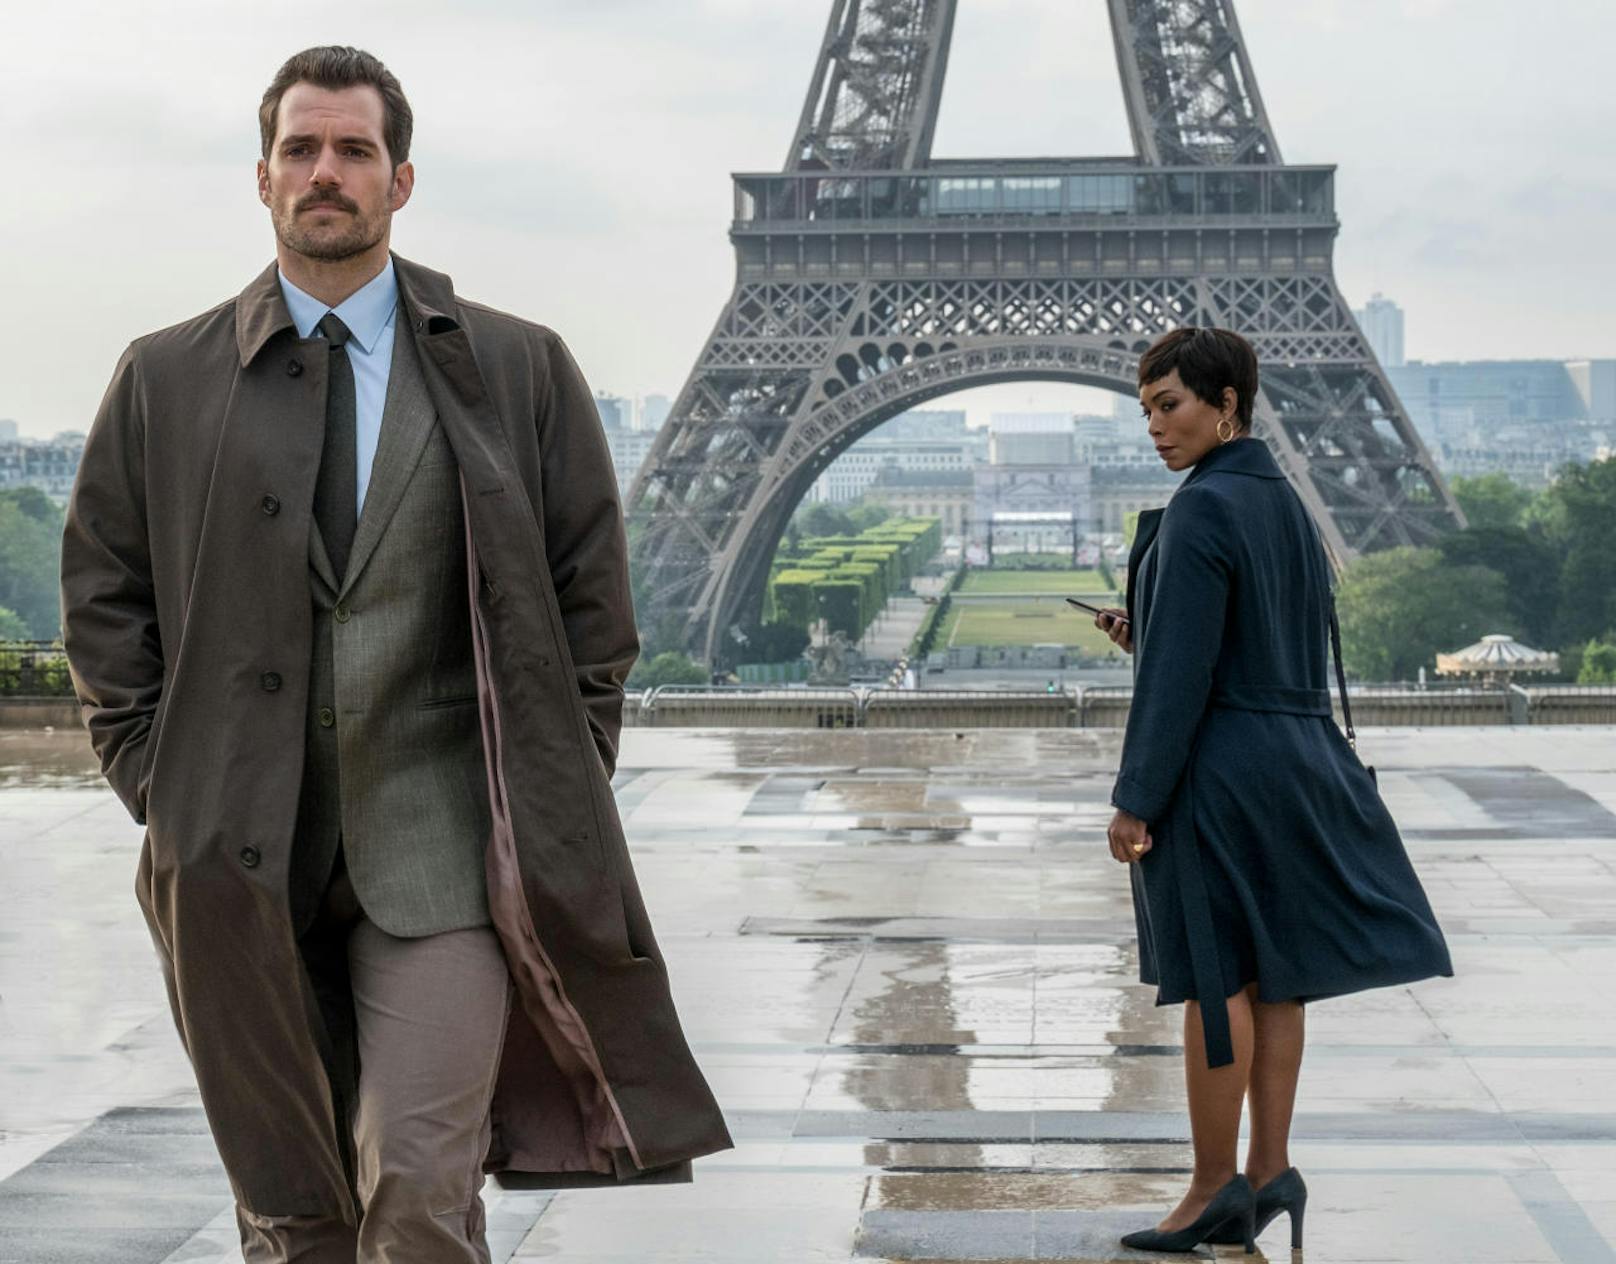 Henry Cavill und Angela Bassett in "Mission: Impossible - Fallout"